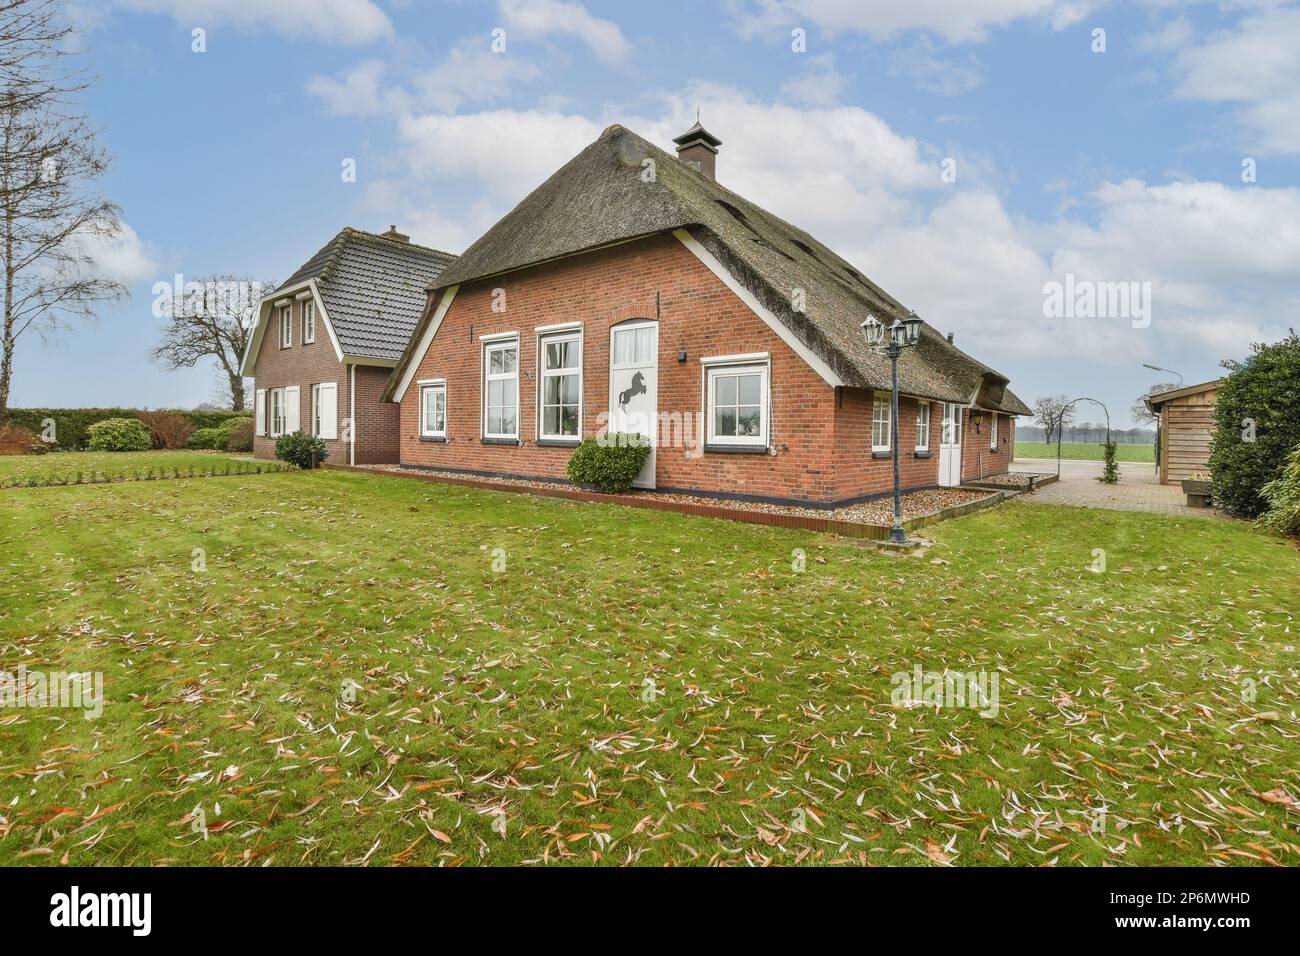 a red brick house with thatched roof and white trim around the windows, on a grassy lawn in front of it Stock Photo